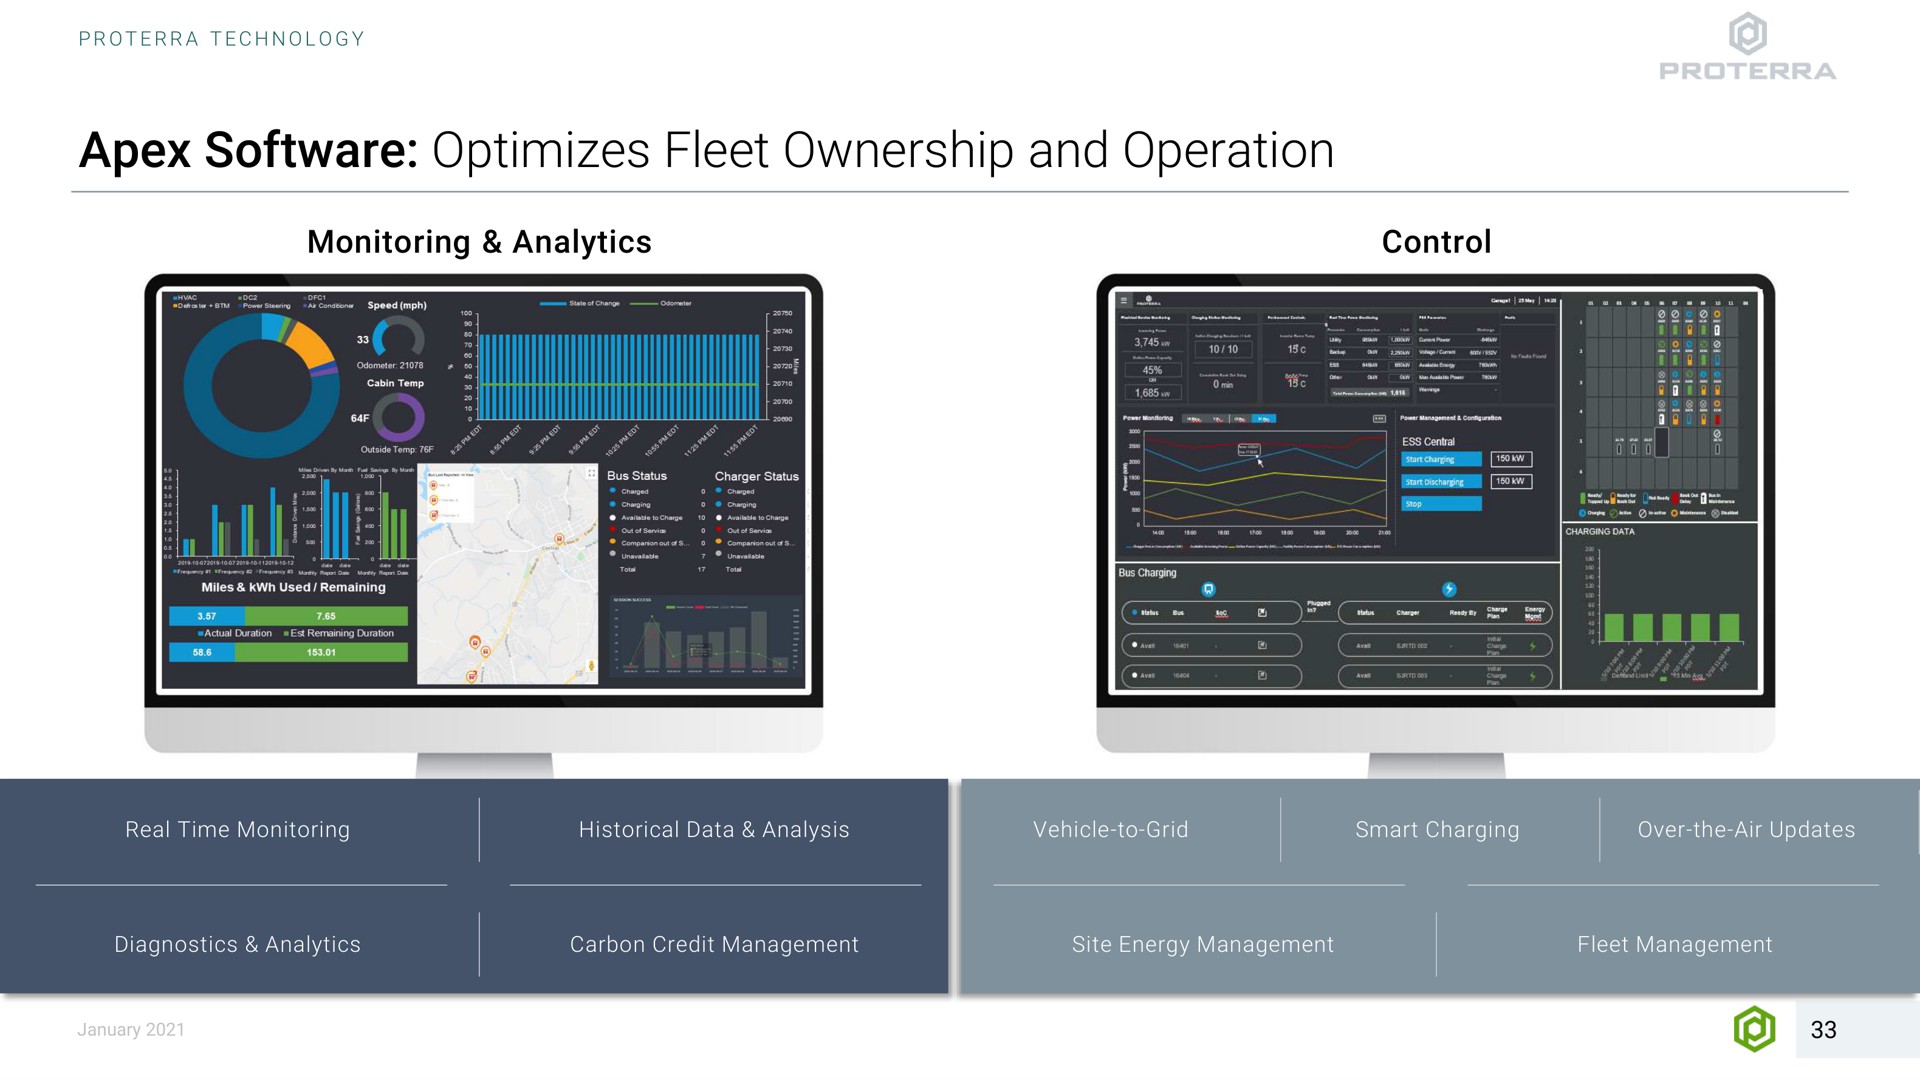 apex optimizes fleet ownership and operation monitoring analytics control real time monitoring carbon credit management historical data analysis site energy management diagnostics analytics over the air updates management smart charging vehicle to grid | Proterra